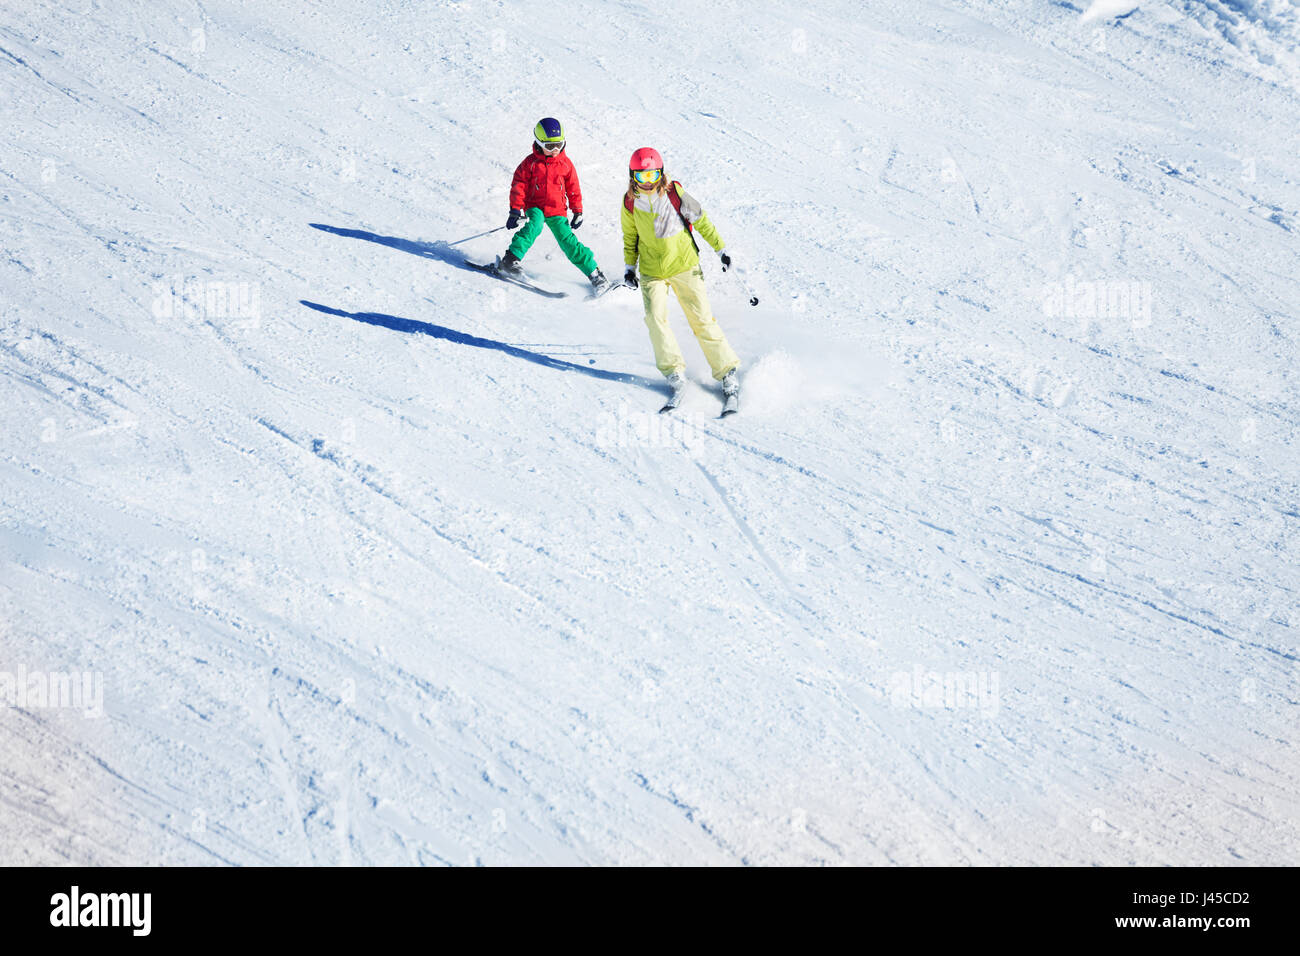 Two skiers hitting the slopes at snowy mountains Stock Photo